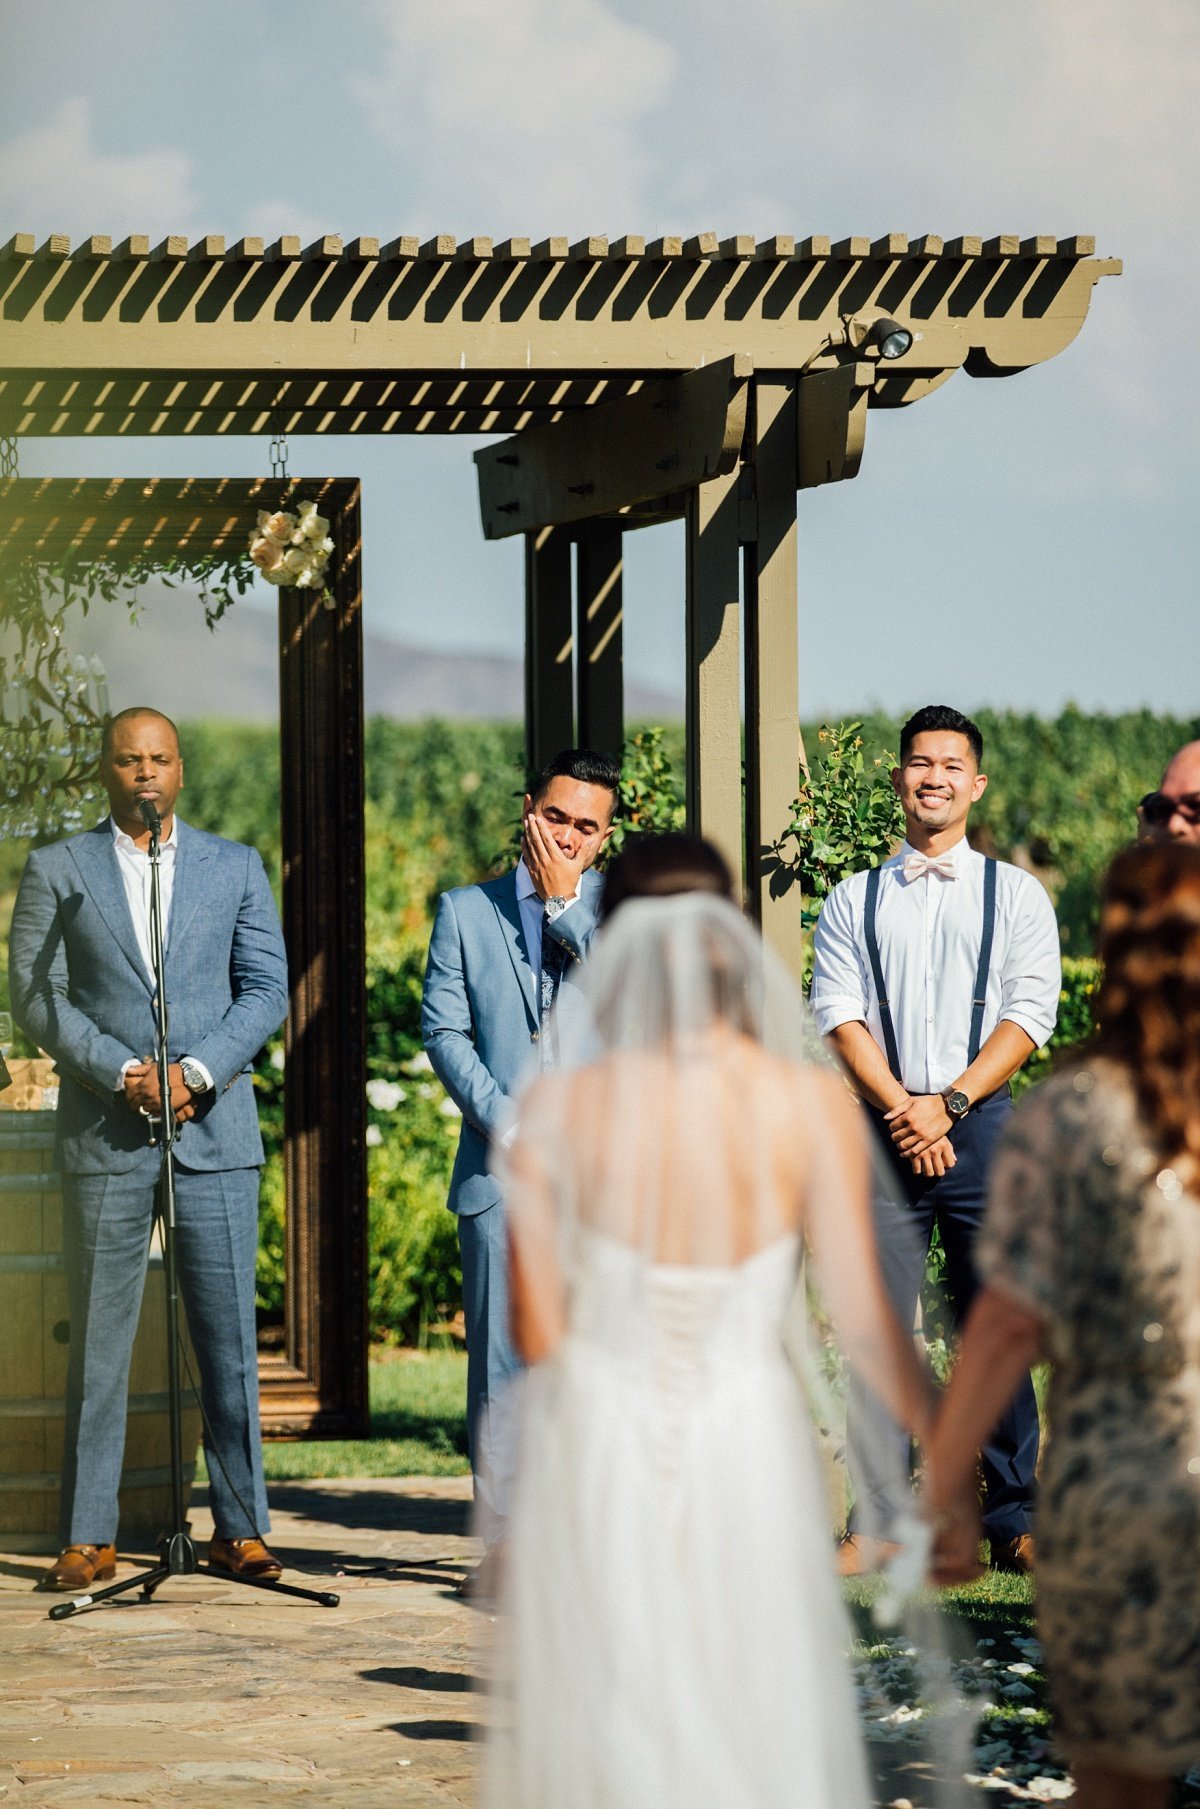 Groom stands at the altar holding back his emotions as the Bride walks up the aisle